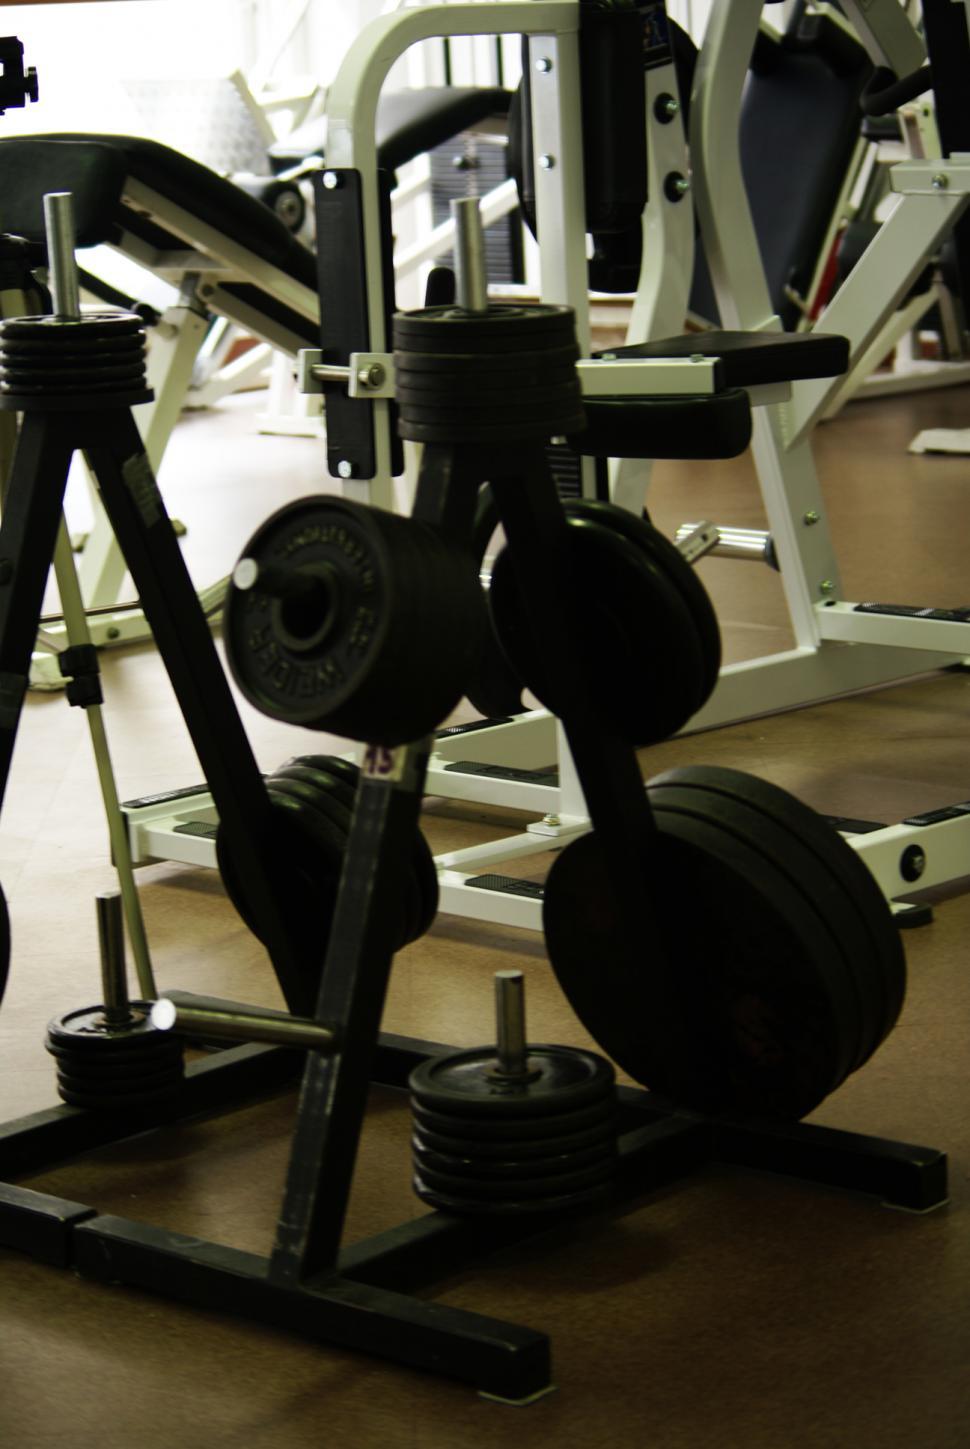 Free Image of Row of Exercise Equipment in Gym 